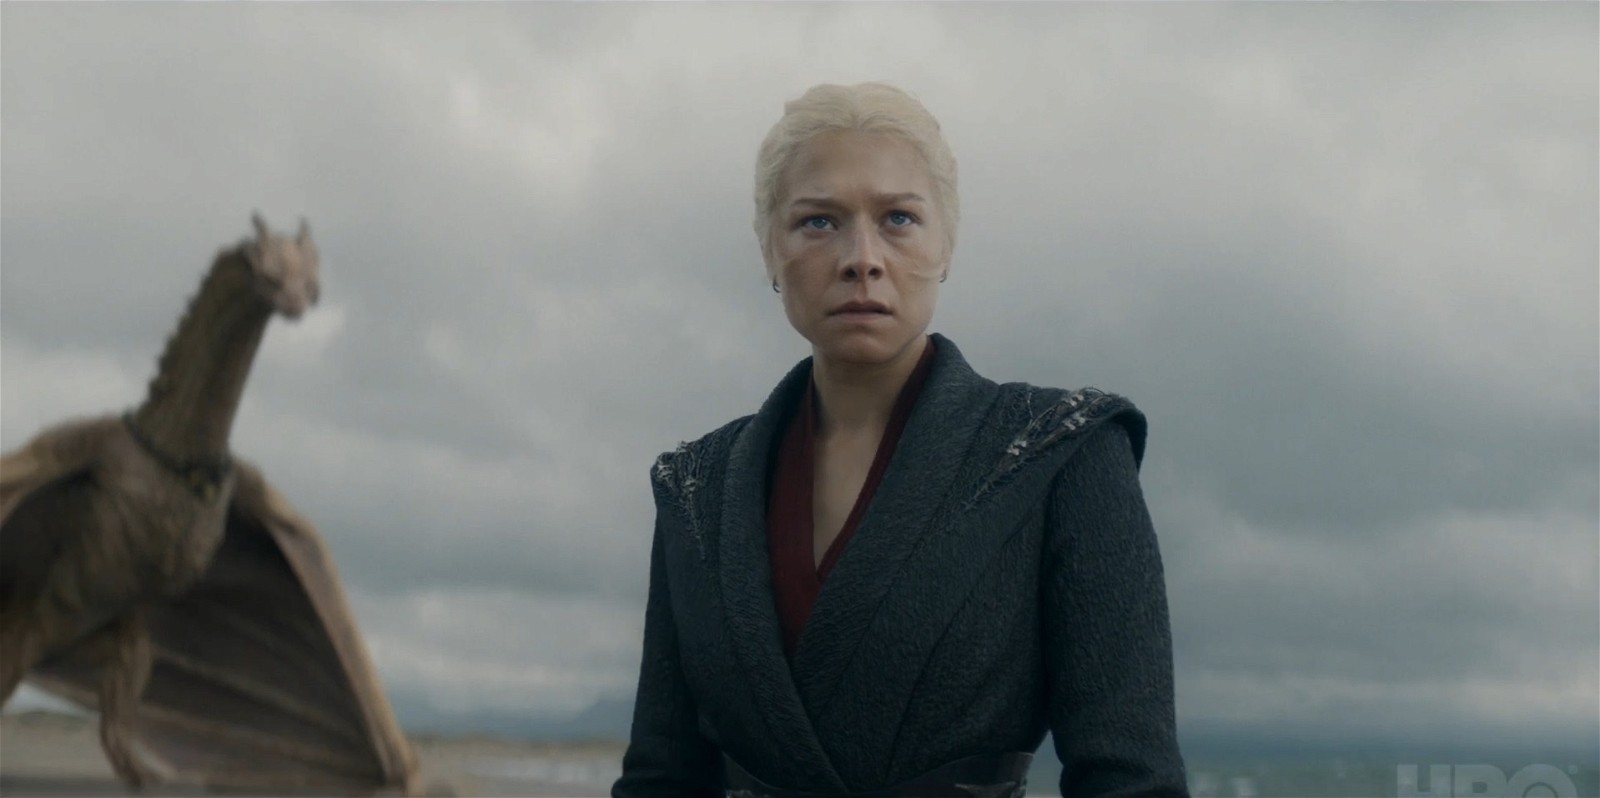 A pensive Emma D'Arcy as Queen Rhaenyra in a still from House of the Dragon Season 2 trailer